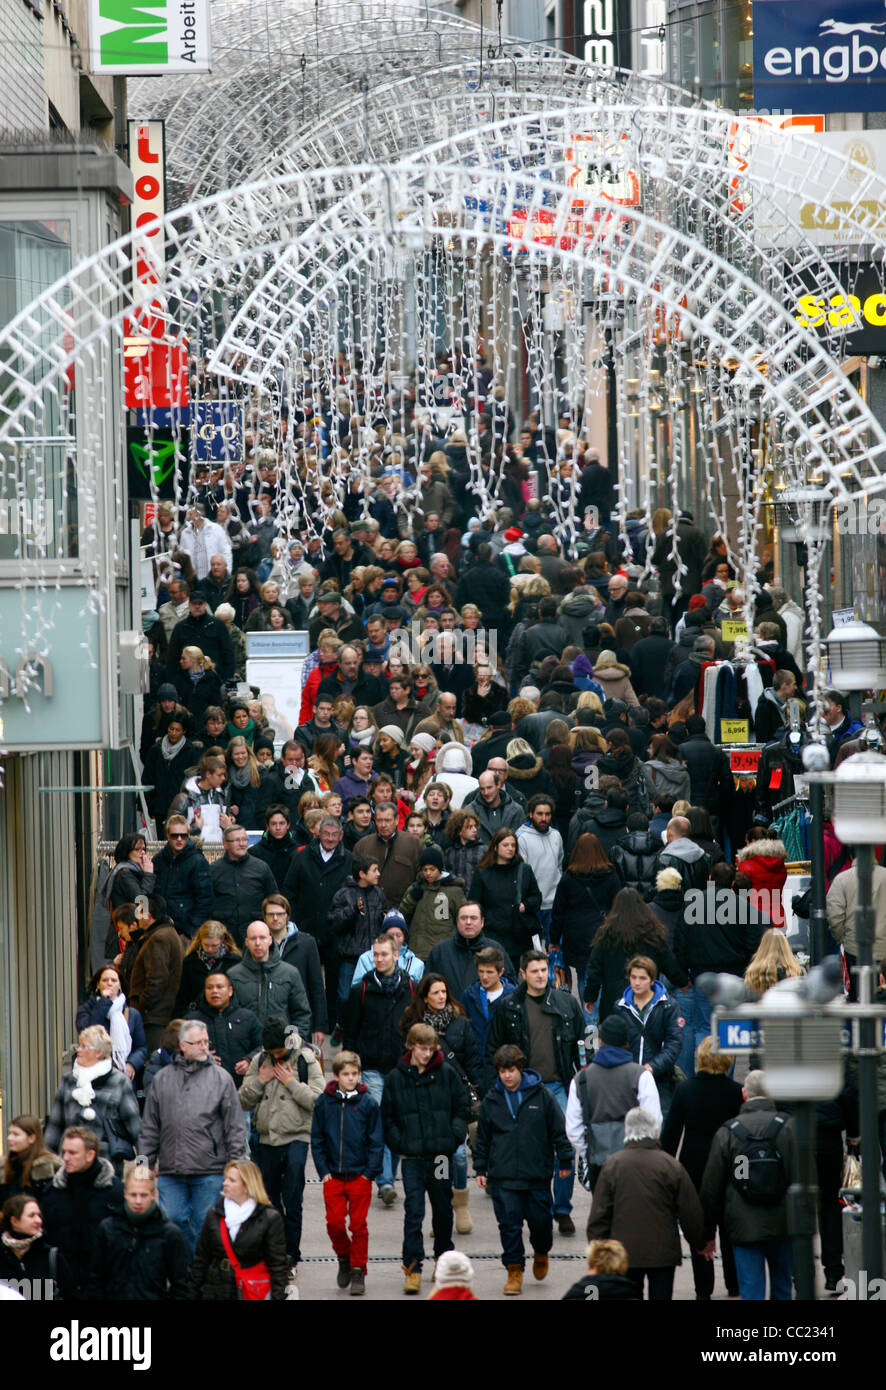 Shopping street, full of people. Going shopping. Essen, Germany, Europe Stock Photo